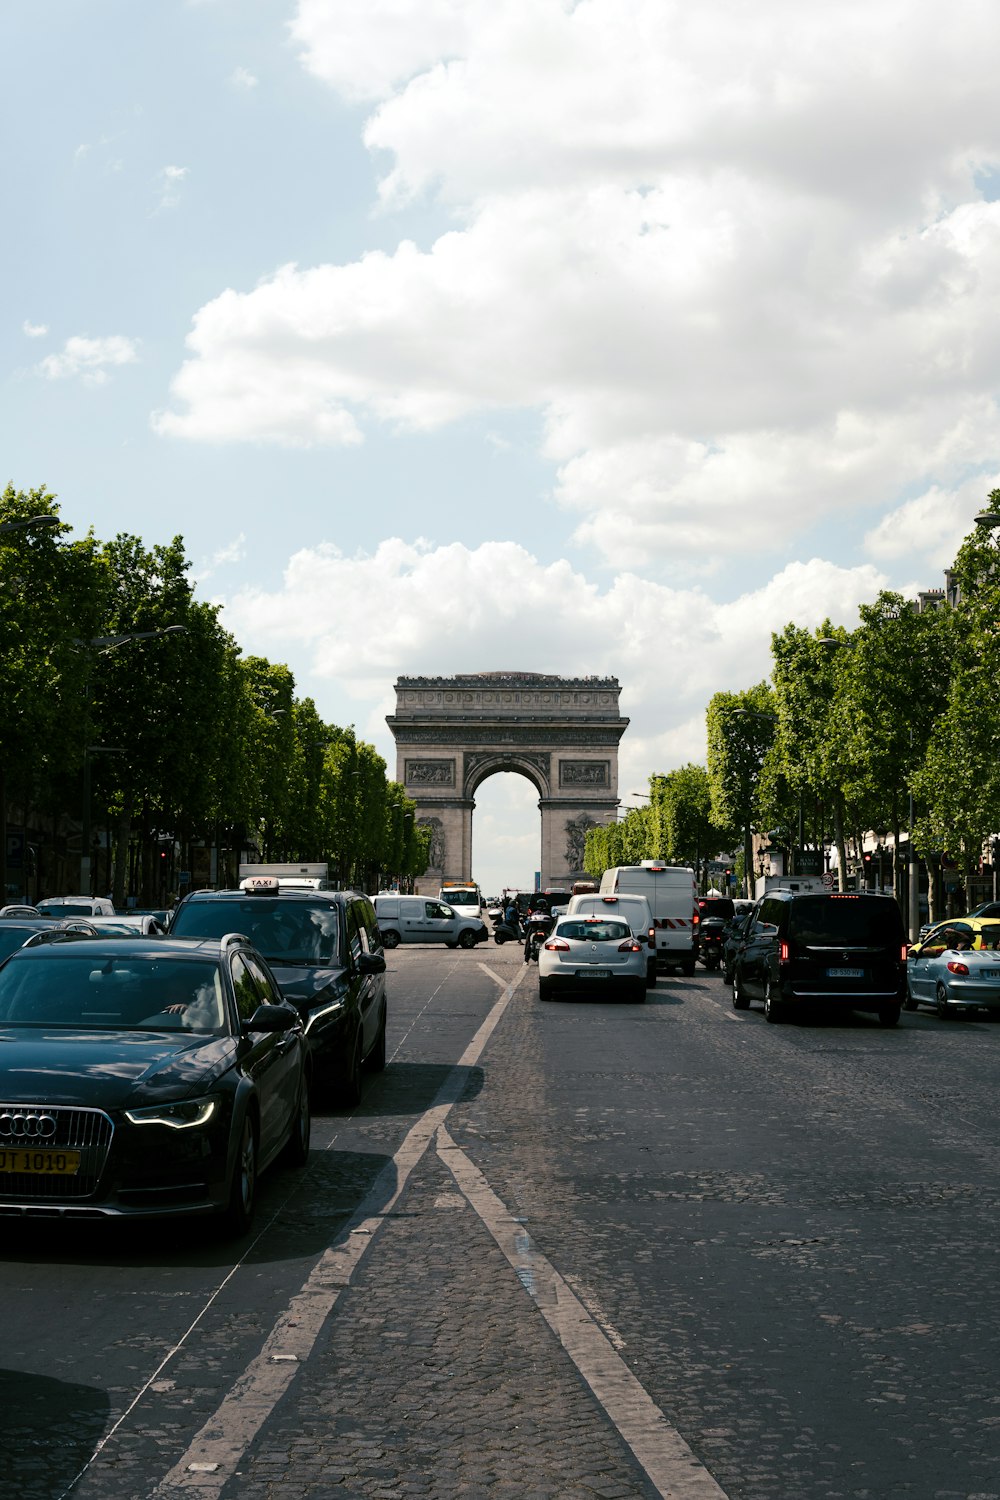 a road with cars on it and a large arch in the background